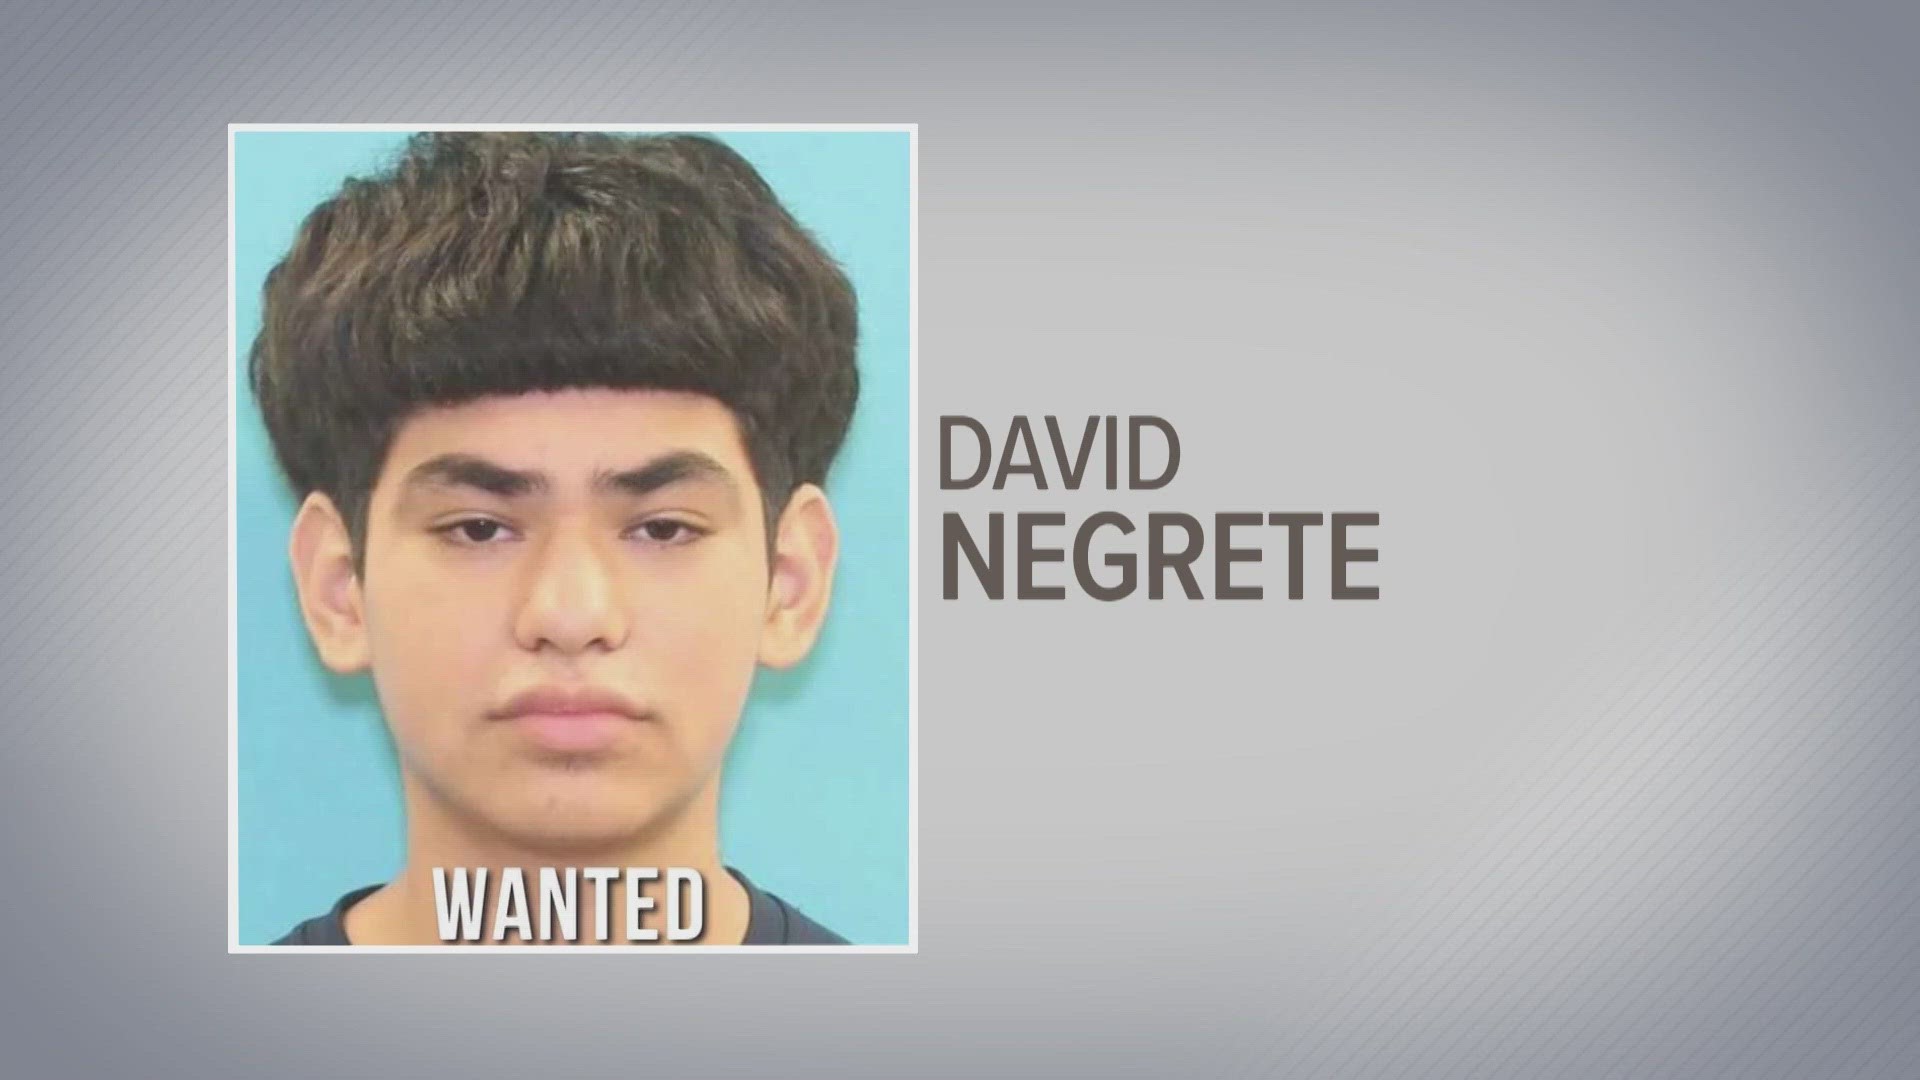 Police say David Negrete, 19, is wanted on a charge of aggravated assault with a deadly weapon and he should be considered "armed and dangerous."